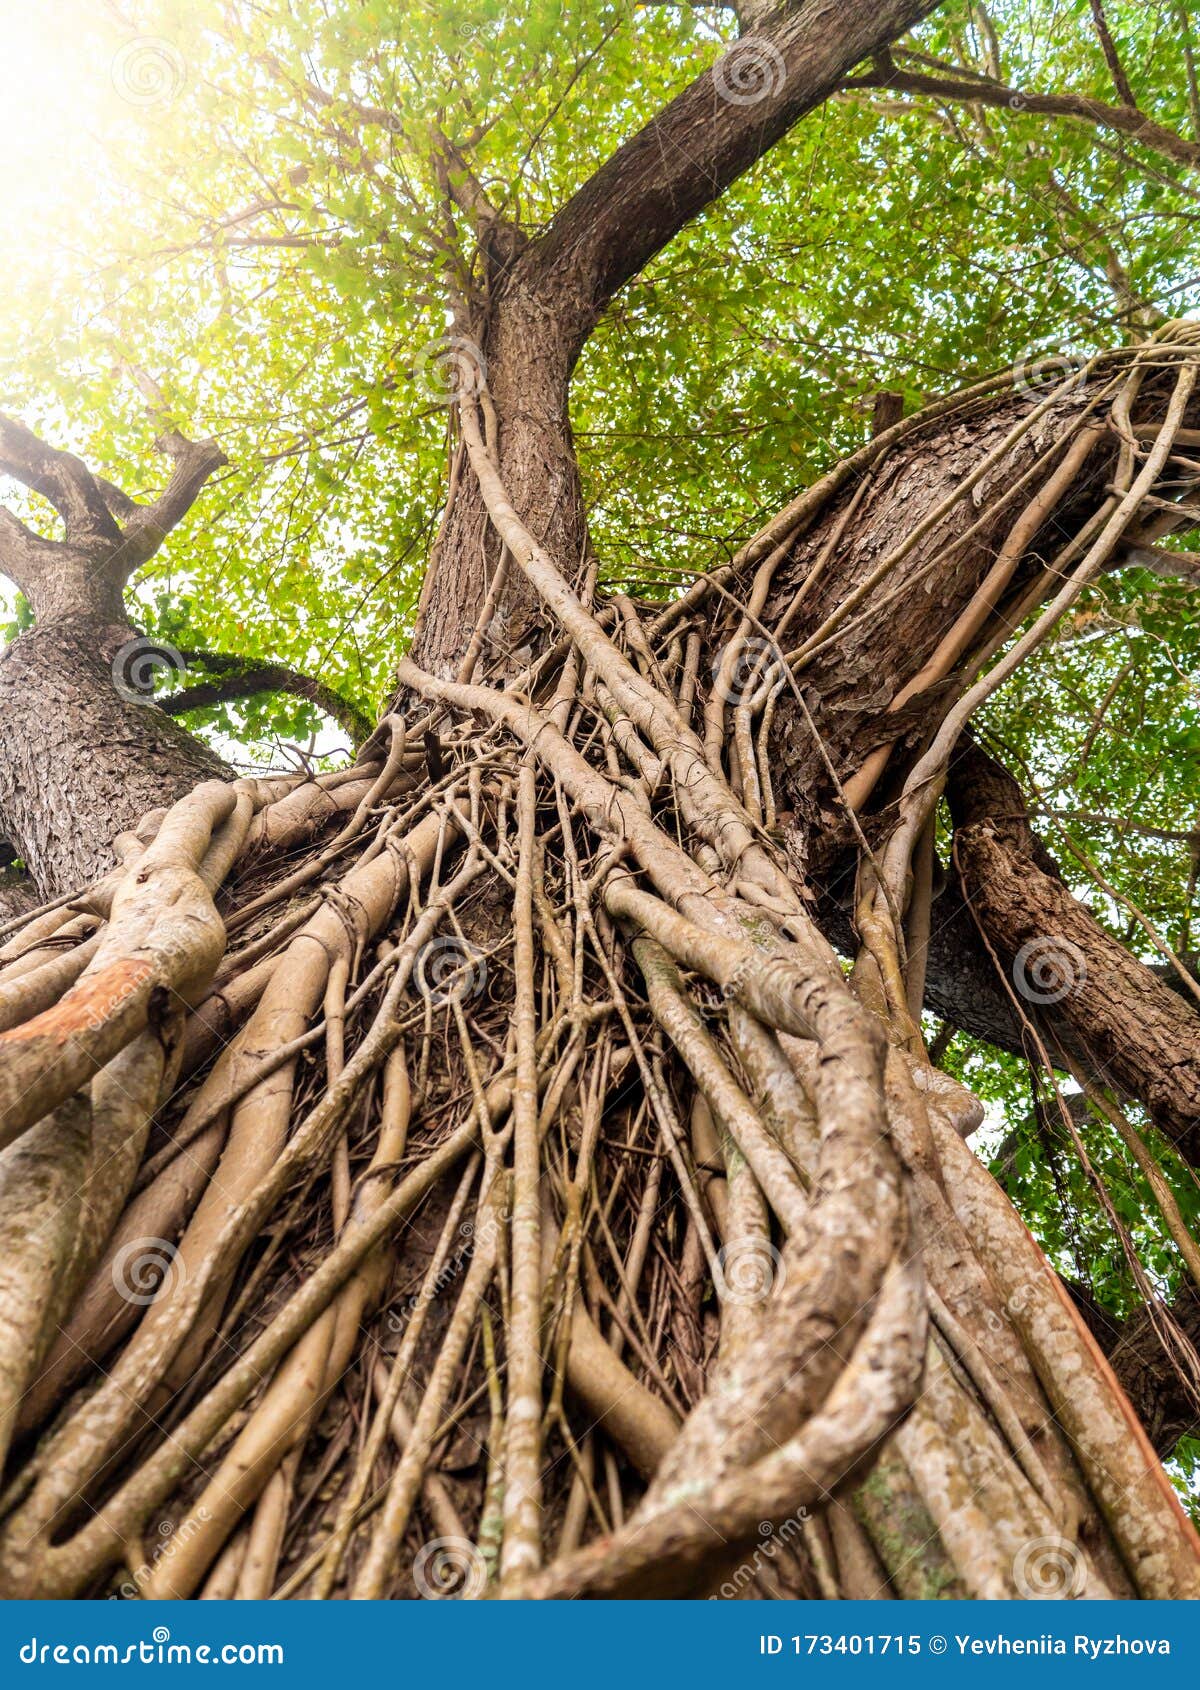 Beautiful Image of Vines and Roots Weaving Big Tree in Tropical